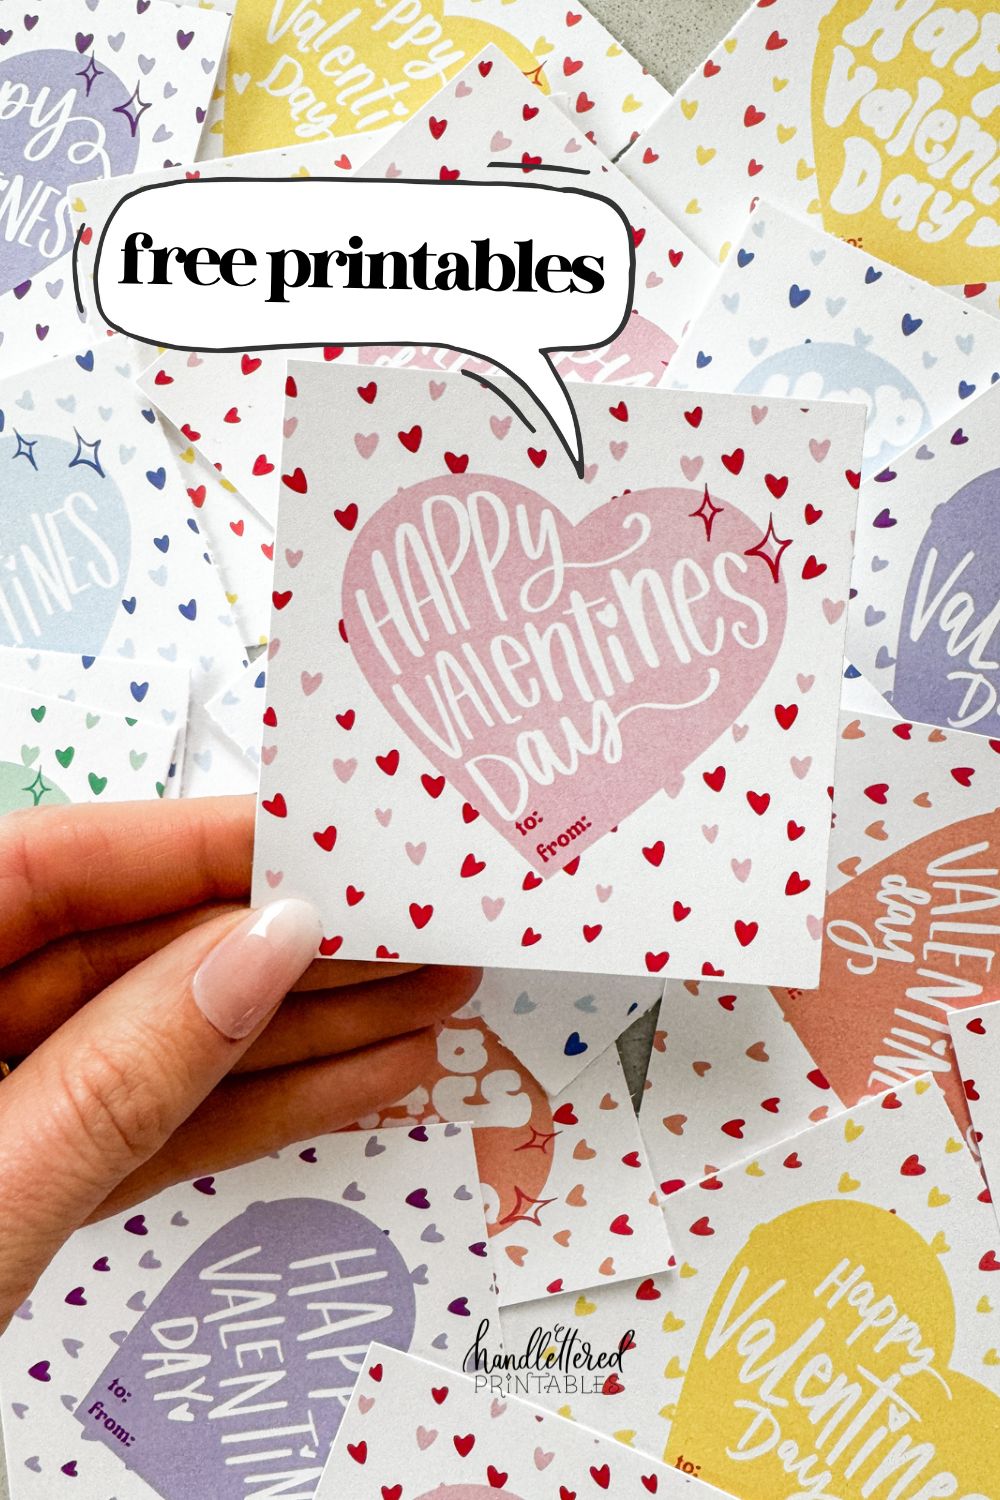 free printable happy valentines day cards in 6 candy colors (pink, purple, yellow, blue, orange, and green) image shows valentines cut to size (square), valentine reads 'happy valentines day' pink version being held text reads: free printables